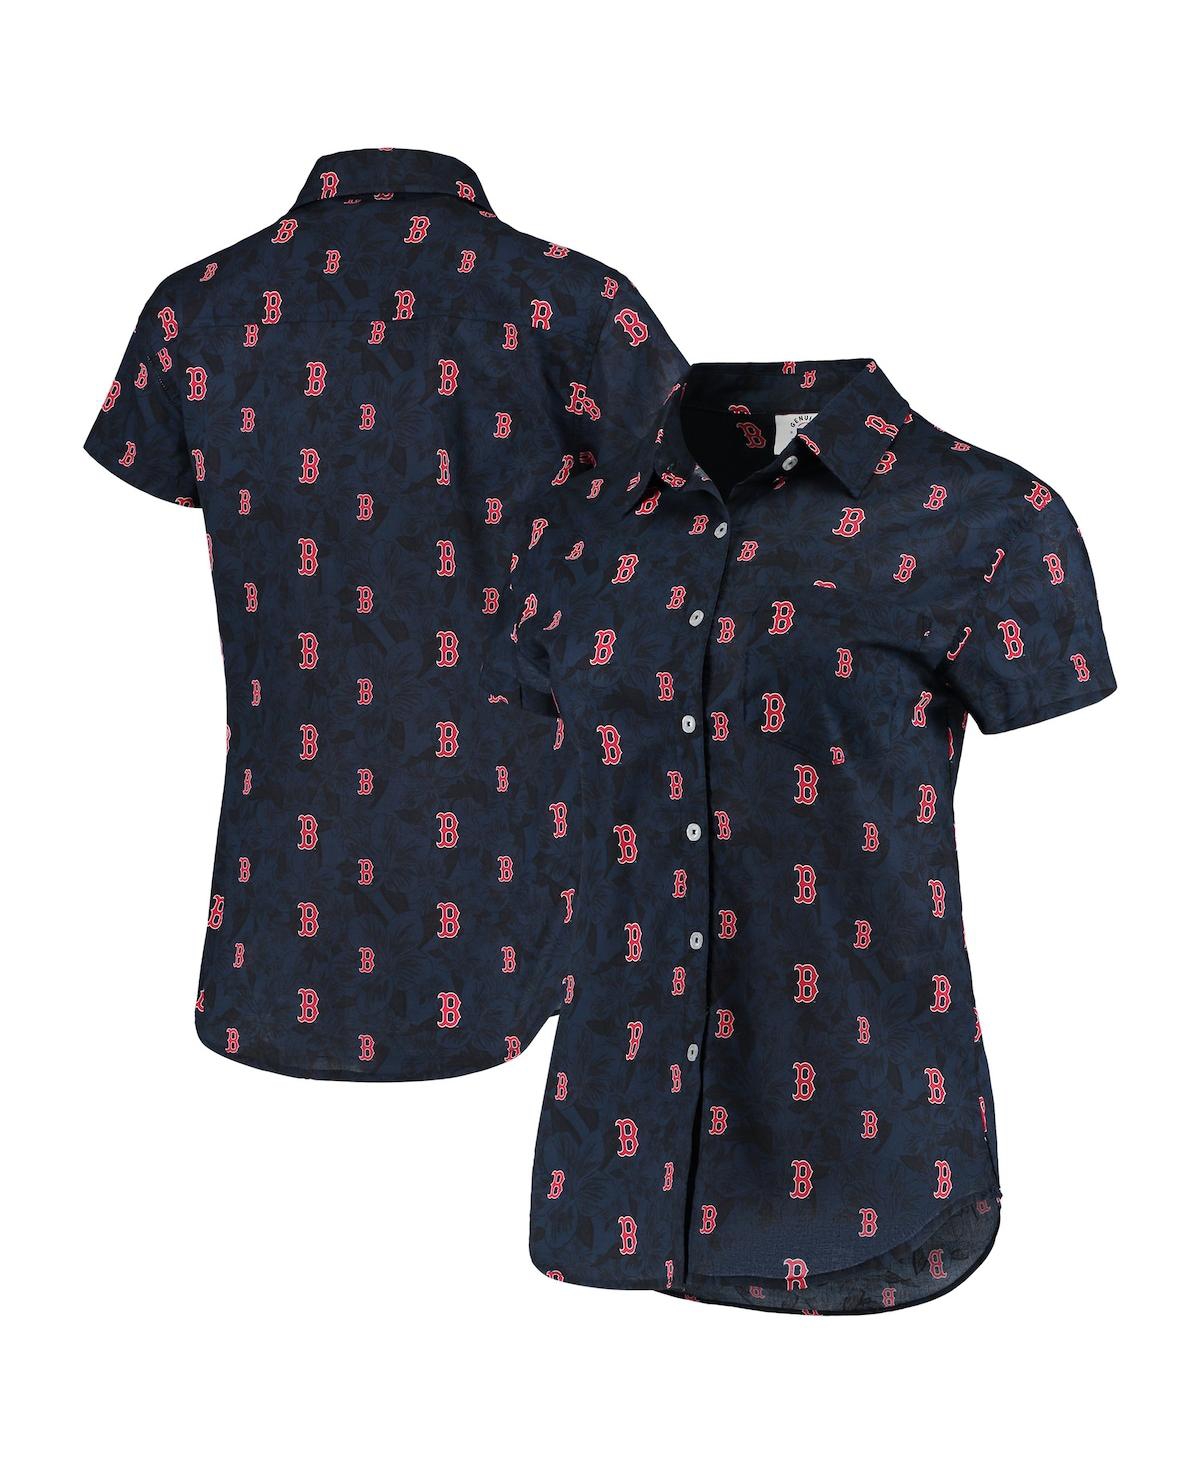 Women's Foco Navy Boston Red Sox Floral Button Up Shirt - Navy